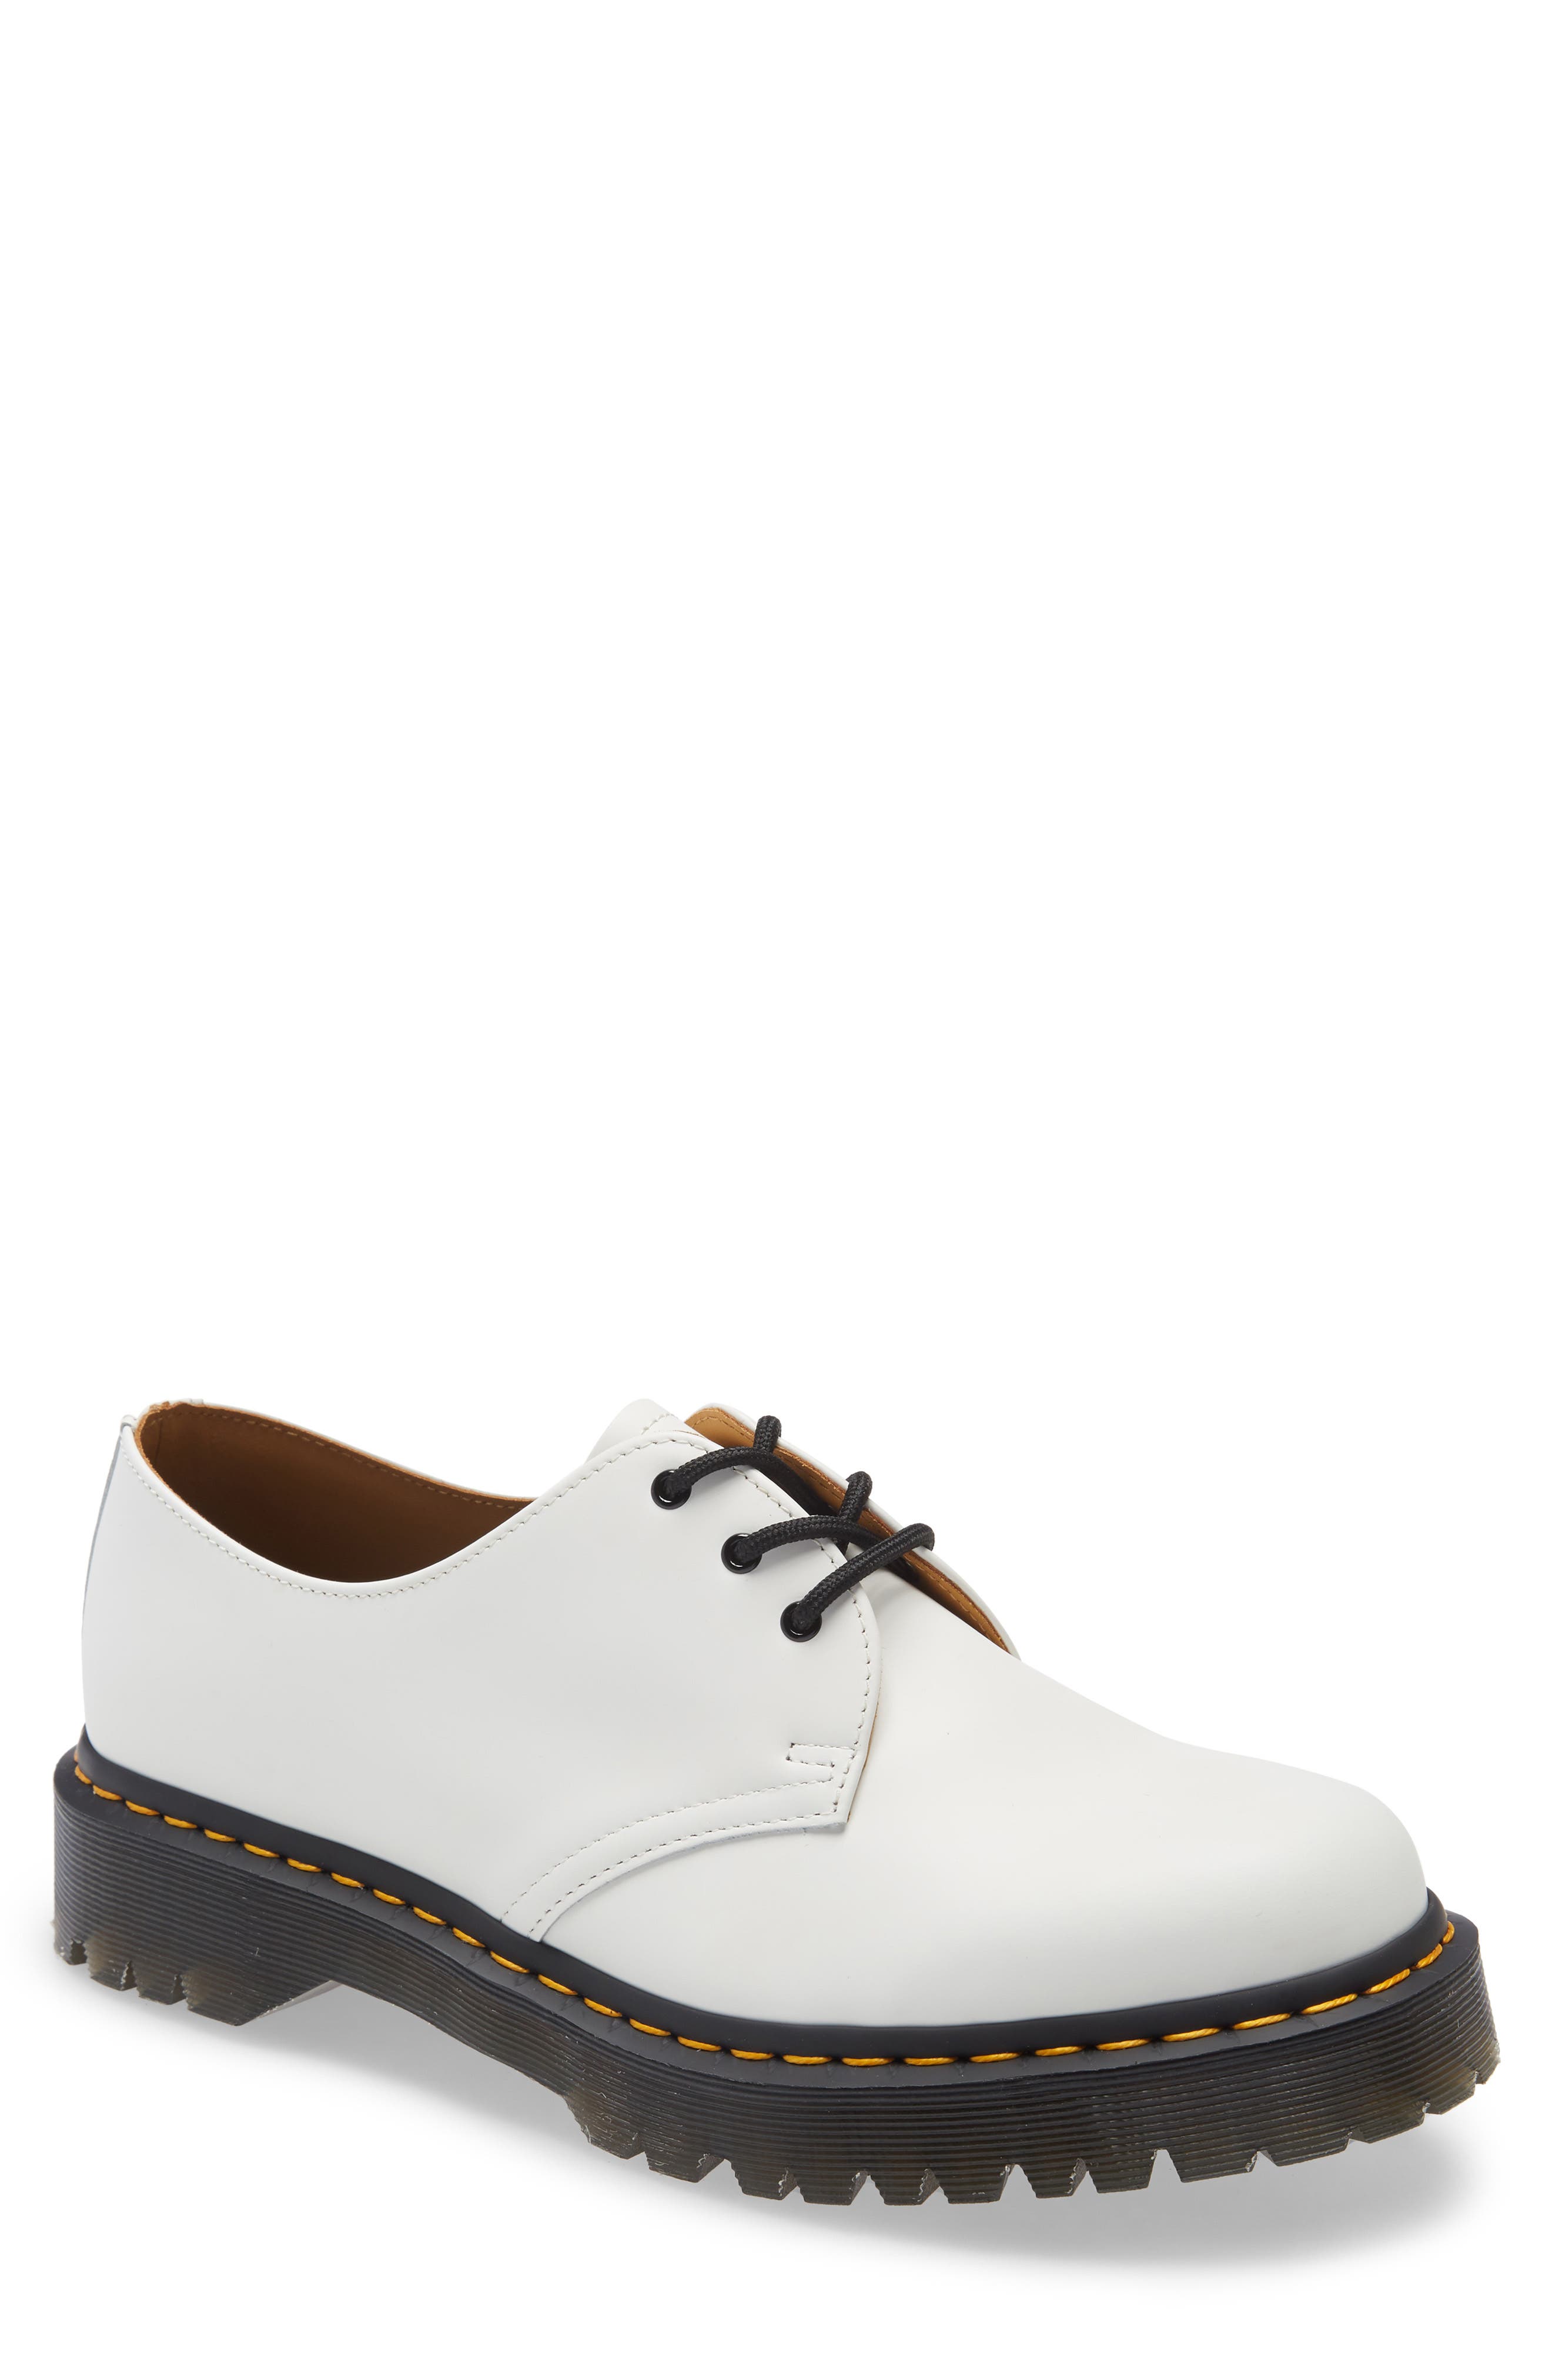 Dr. Martens Plain Toe Derby in White Leather at Nordstrom, Size 14Us